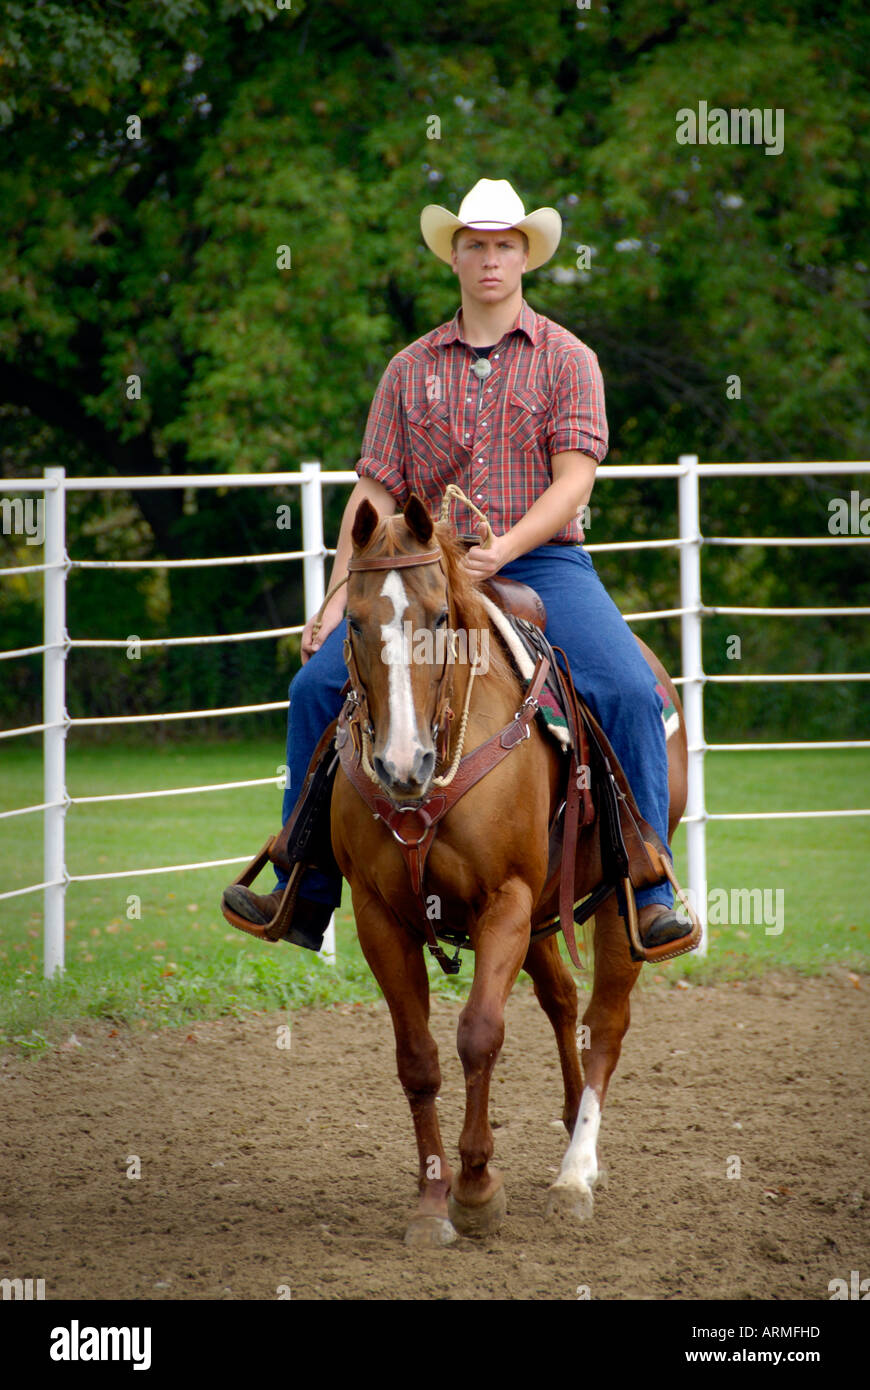 Male High school student riding a brown horse competes in equestrian event Stock Photo